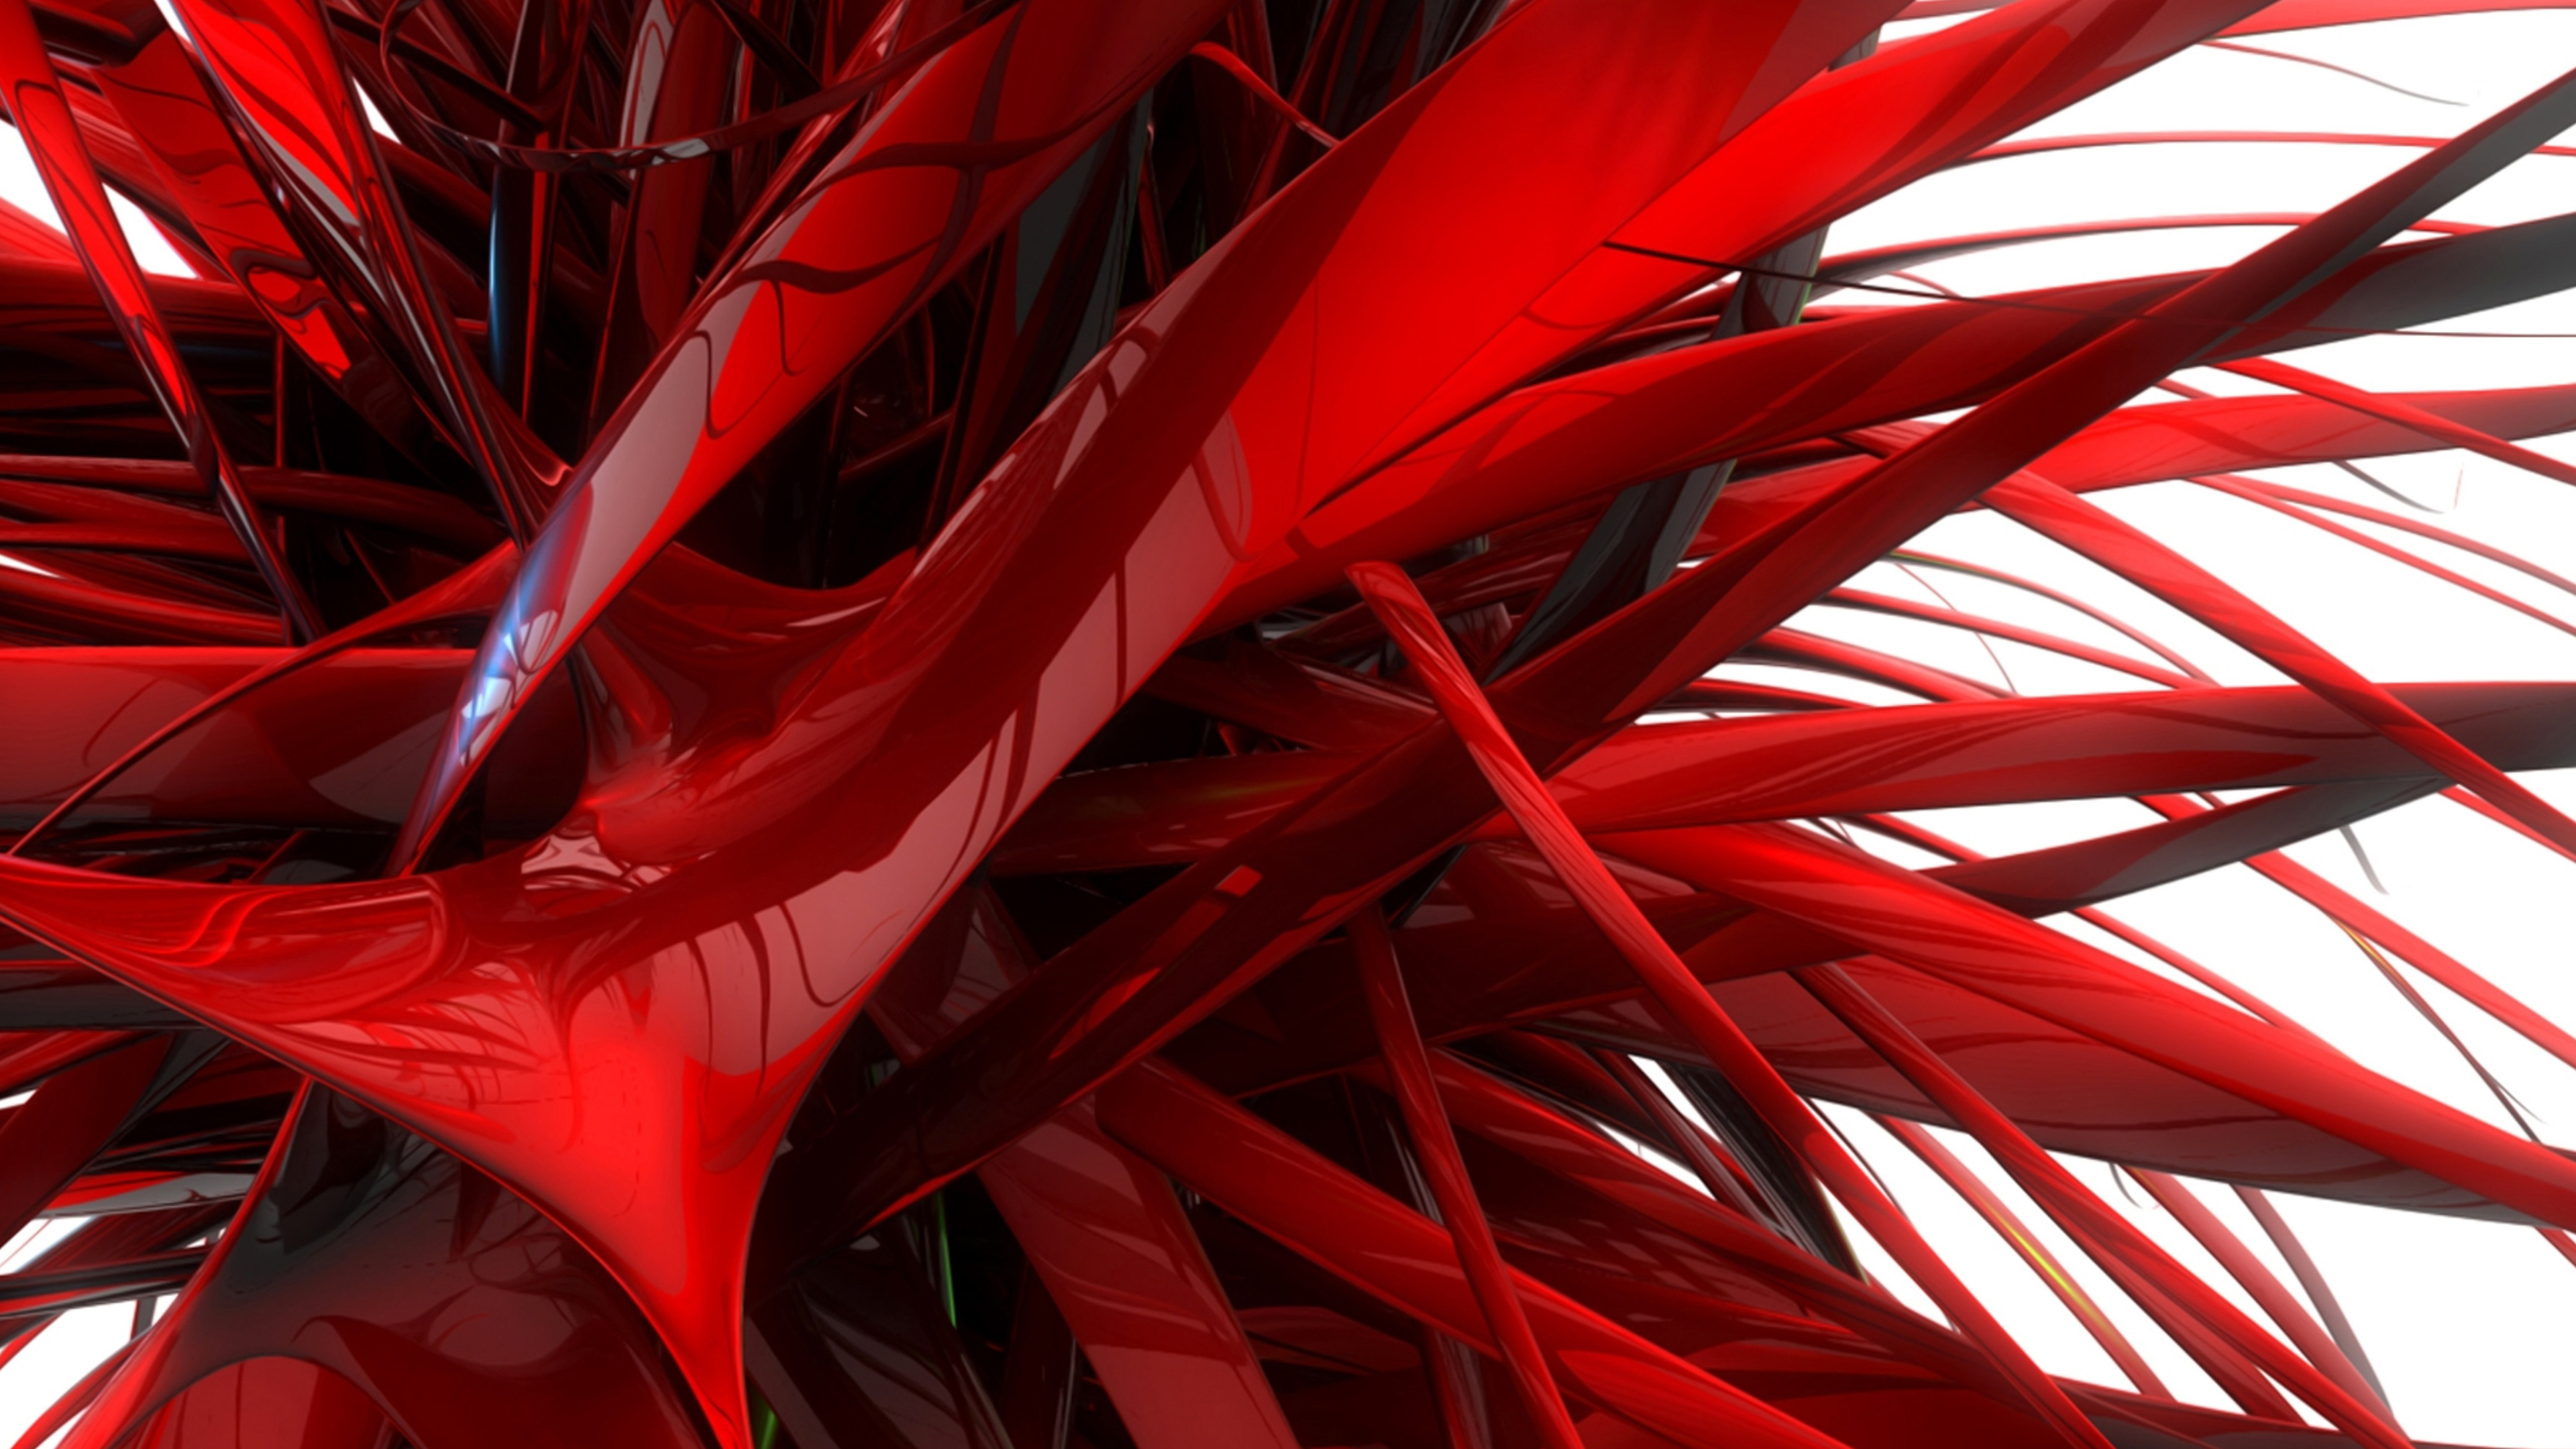 Red and White Abstract Painting. Wallpaper in 3840x2160 Resolution